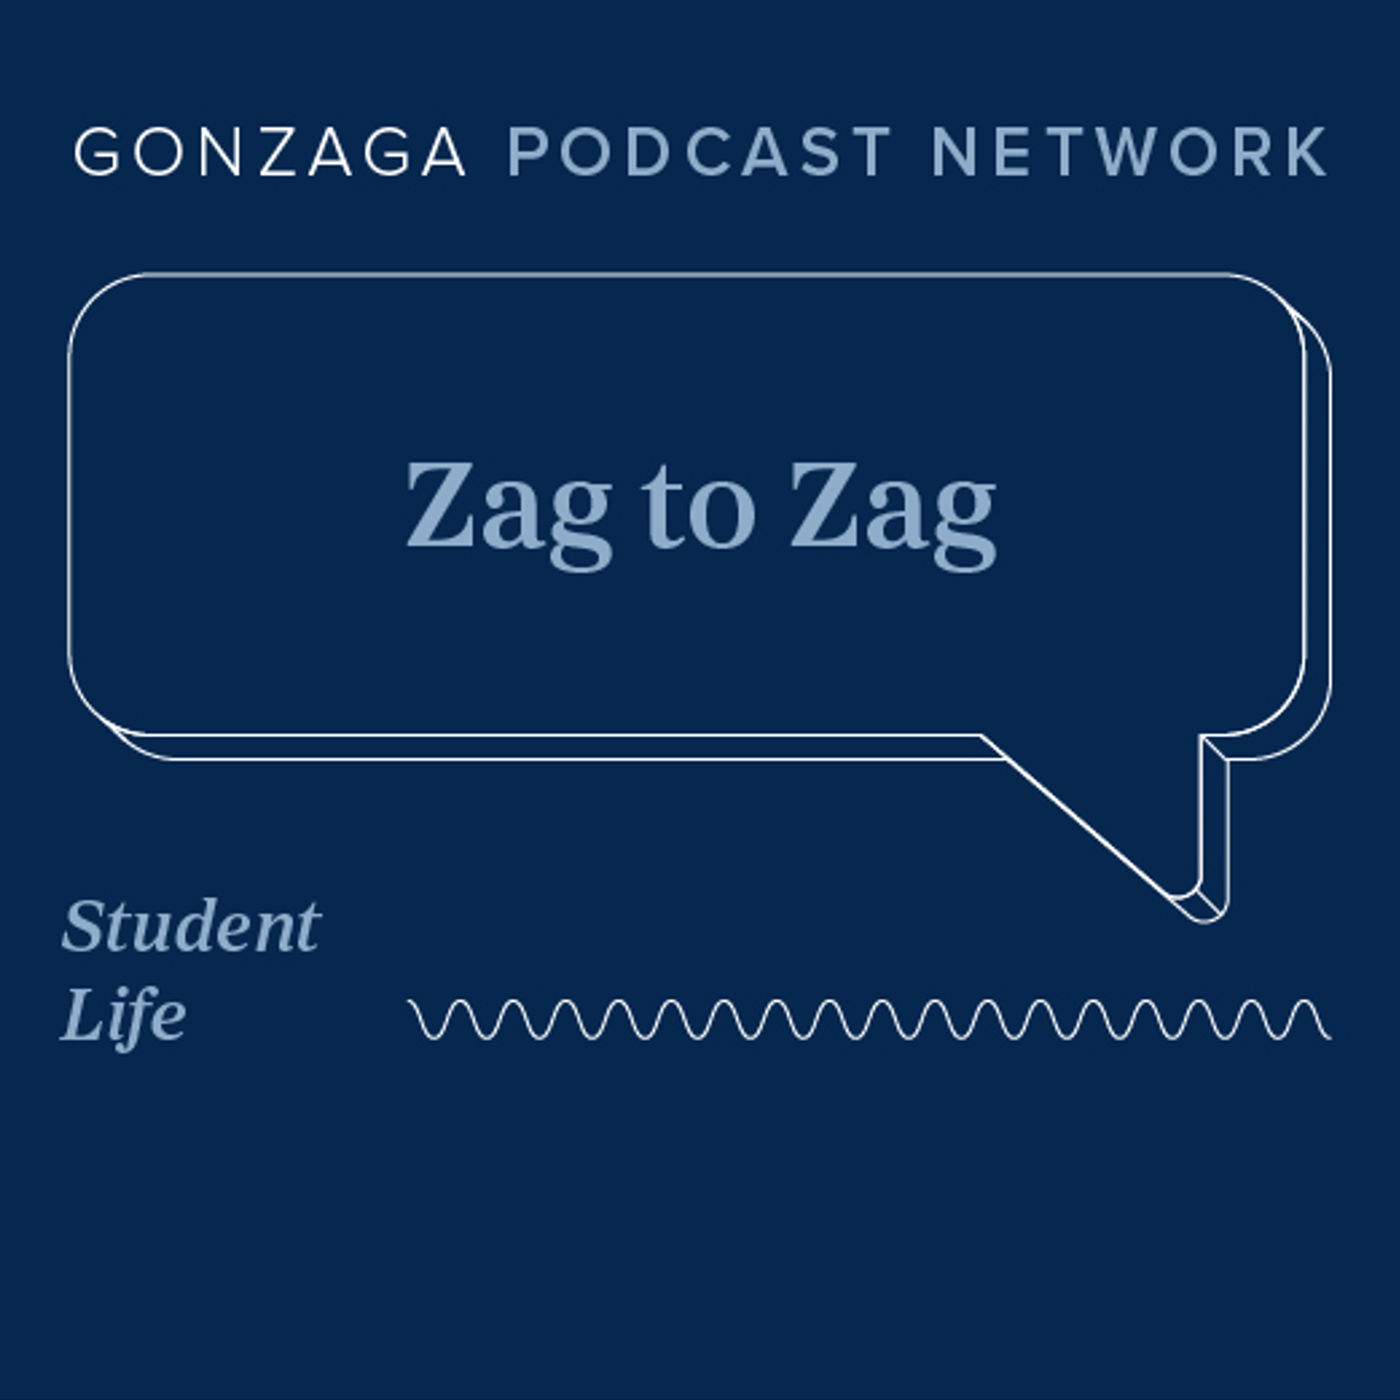 Life in the School of Engineering and Applied Science | Zag To Zag